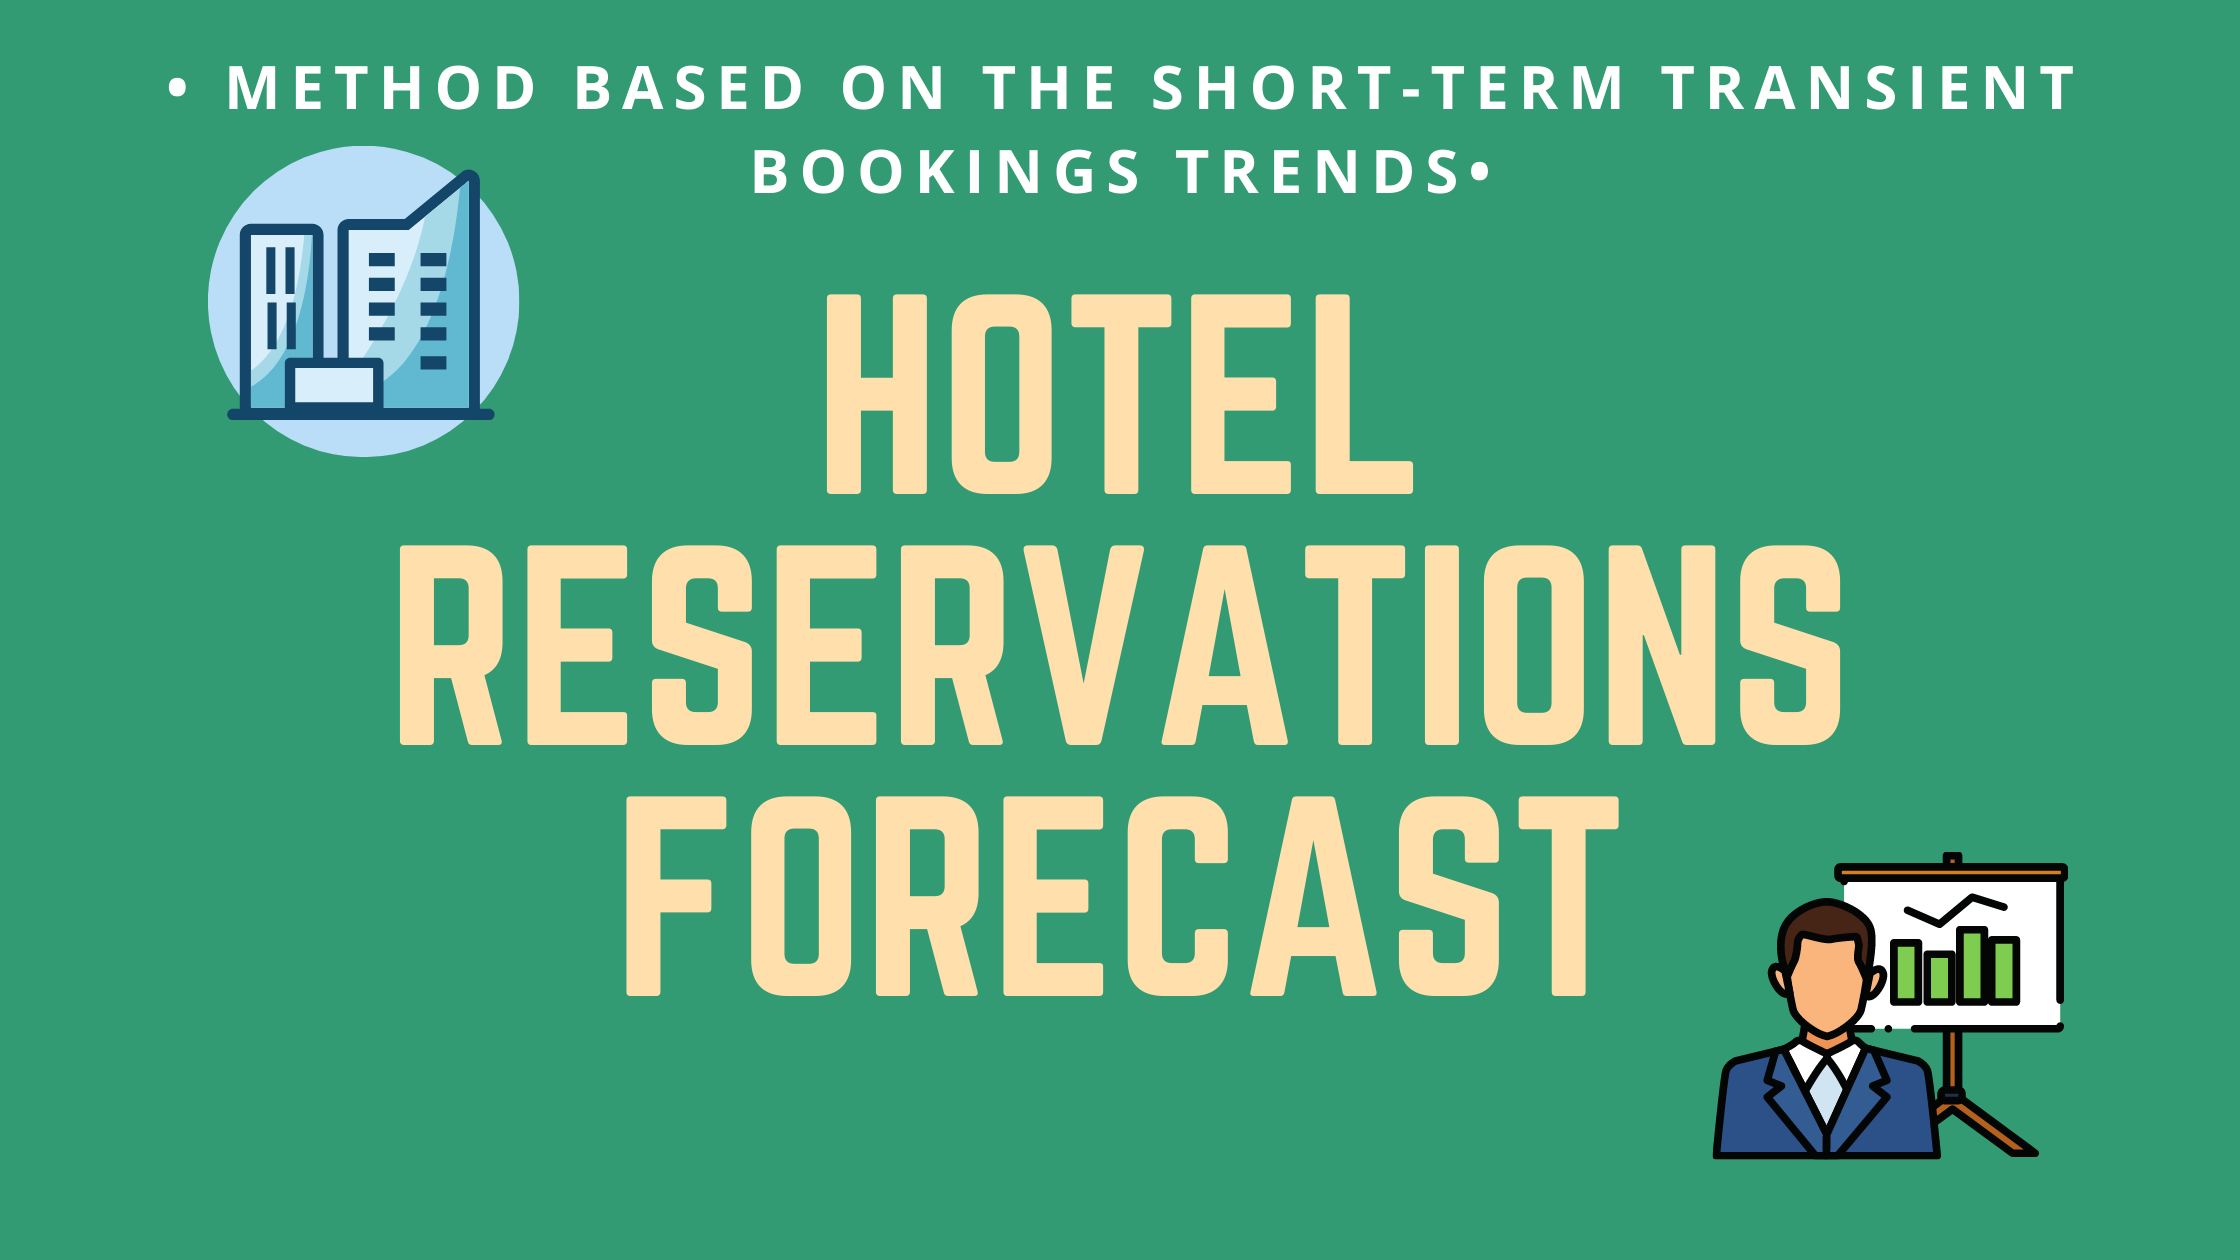 How to create transient reservations forecast that is based on short-term trends?